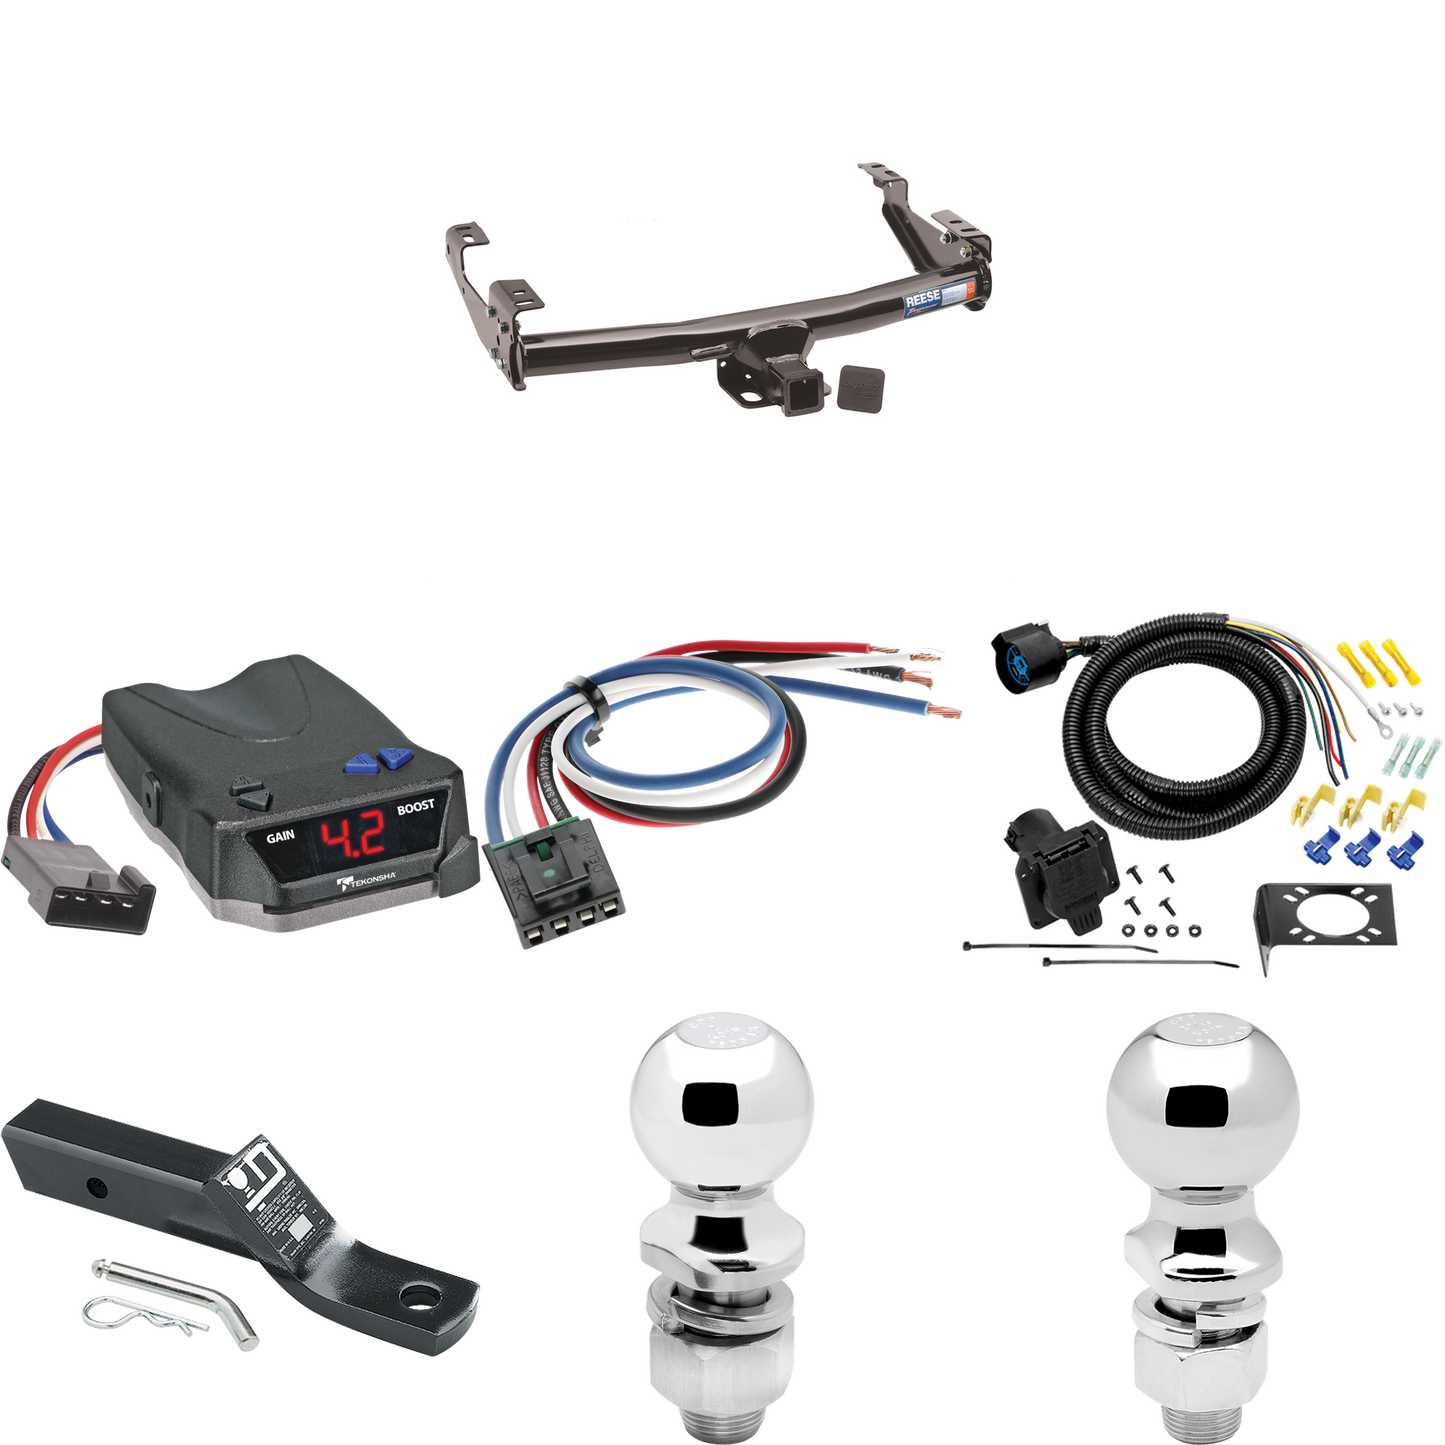 Fits 1992-2000 Chevrolet C35 Trailer Hitch Tow PKG w/ Tekonsha BRAKE-EVN Brake Control + Generic BC Wiring Adapter + 7-Way RV Wiring + 2" & 2-5/16" Ball & Drop Mount (For 4 Dr. Crew Cab w/8 ft. Bed Models) By Reese Towpower